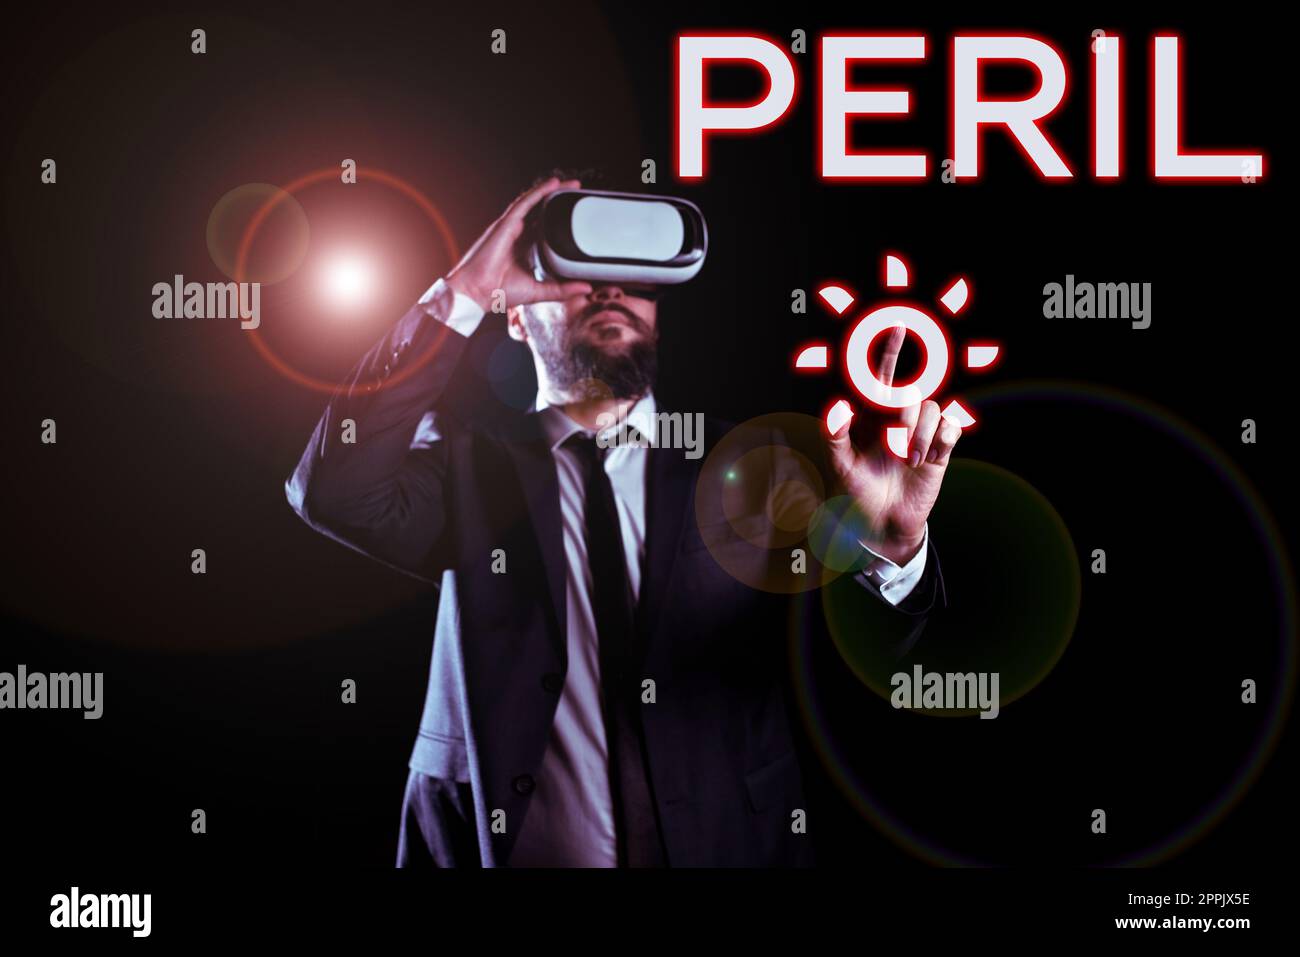 Writing displaying text Peril. Business concept indicates something extremely difficult, dangerous, or hazardous Stock Photo